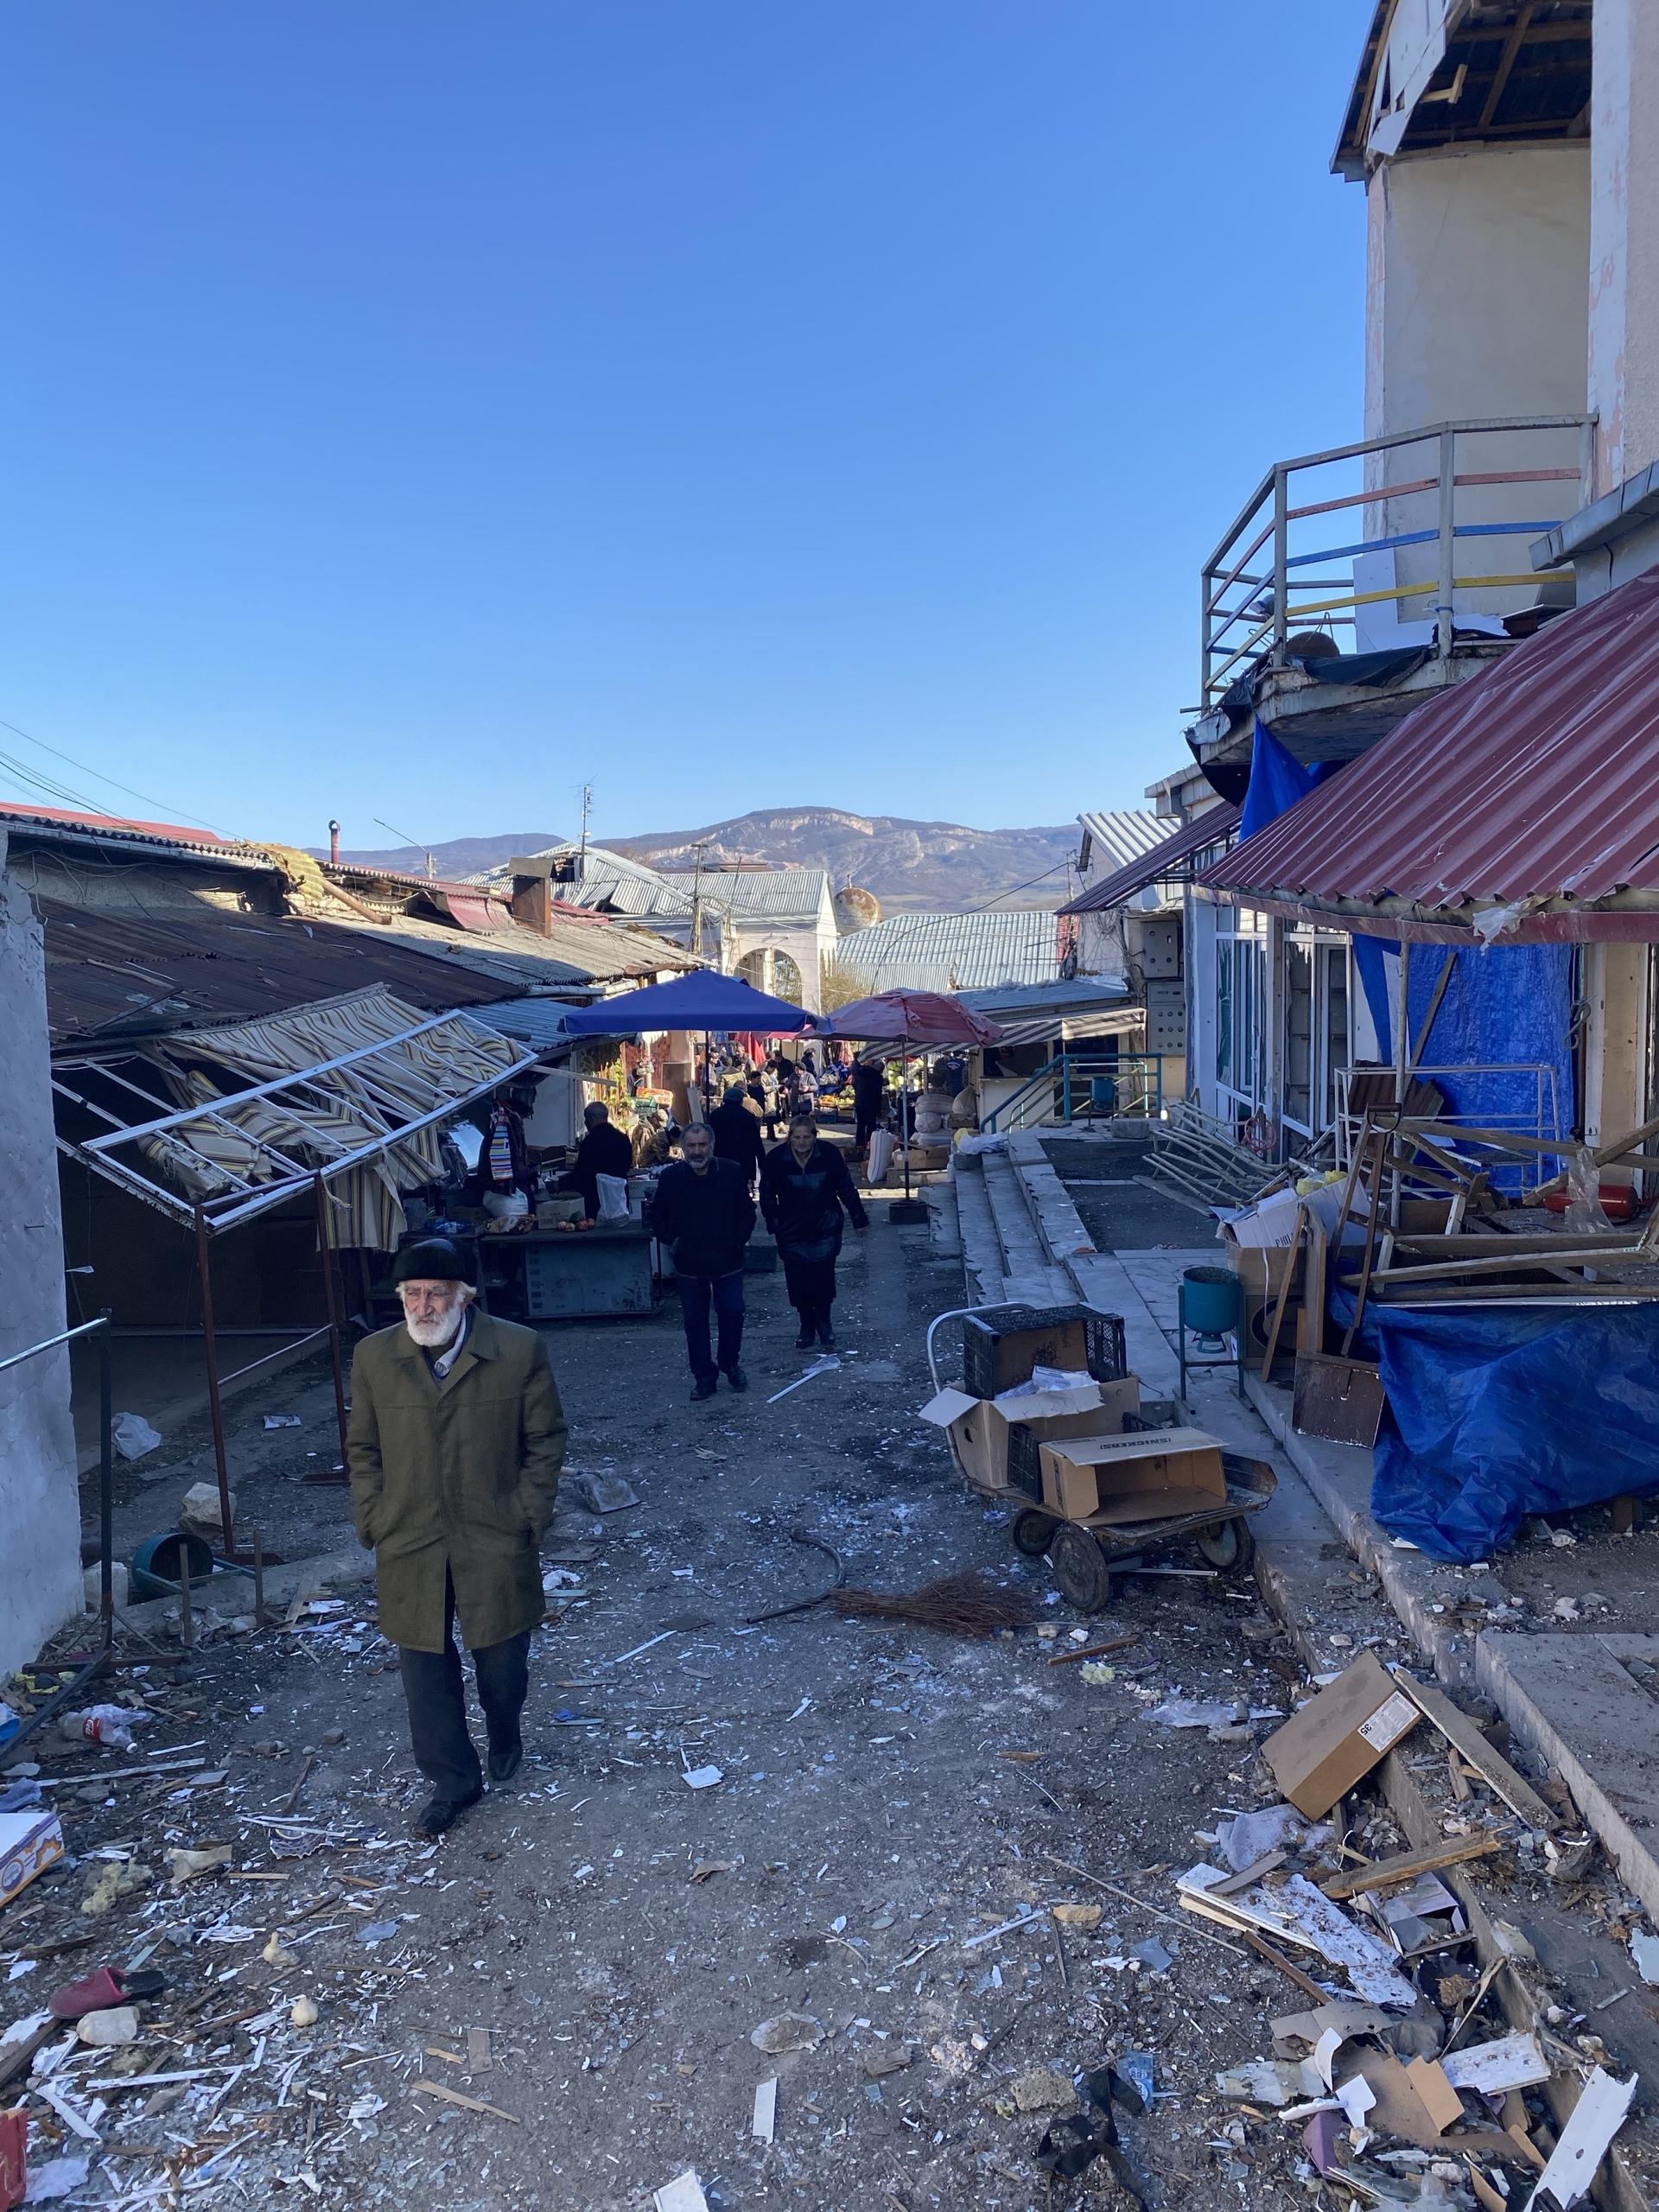 Business slowly restarts in the market of Stepanakert, the de facto capital of Nagorno-Karabakh, after being shelled during the war. 